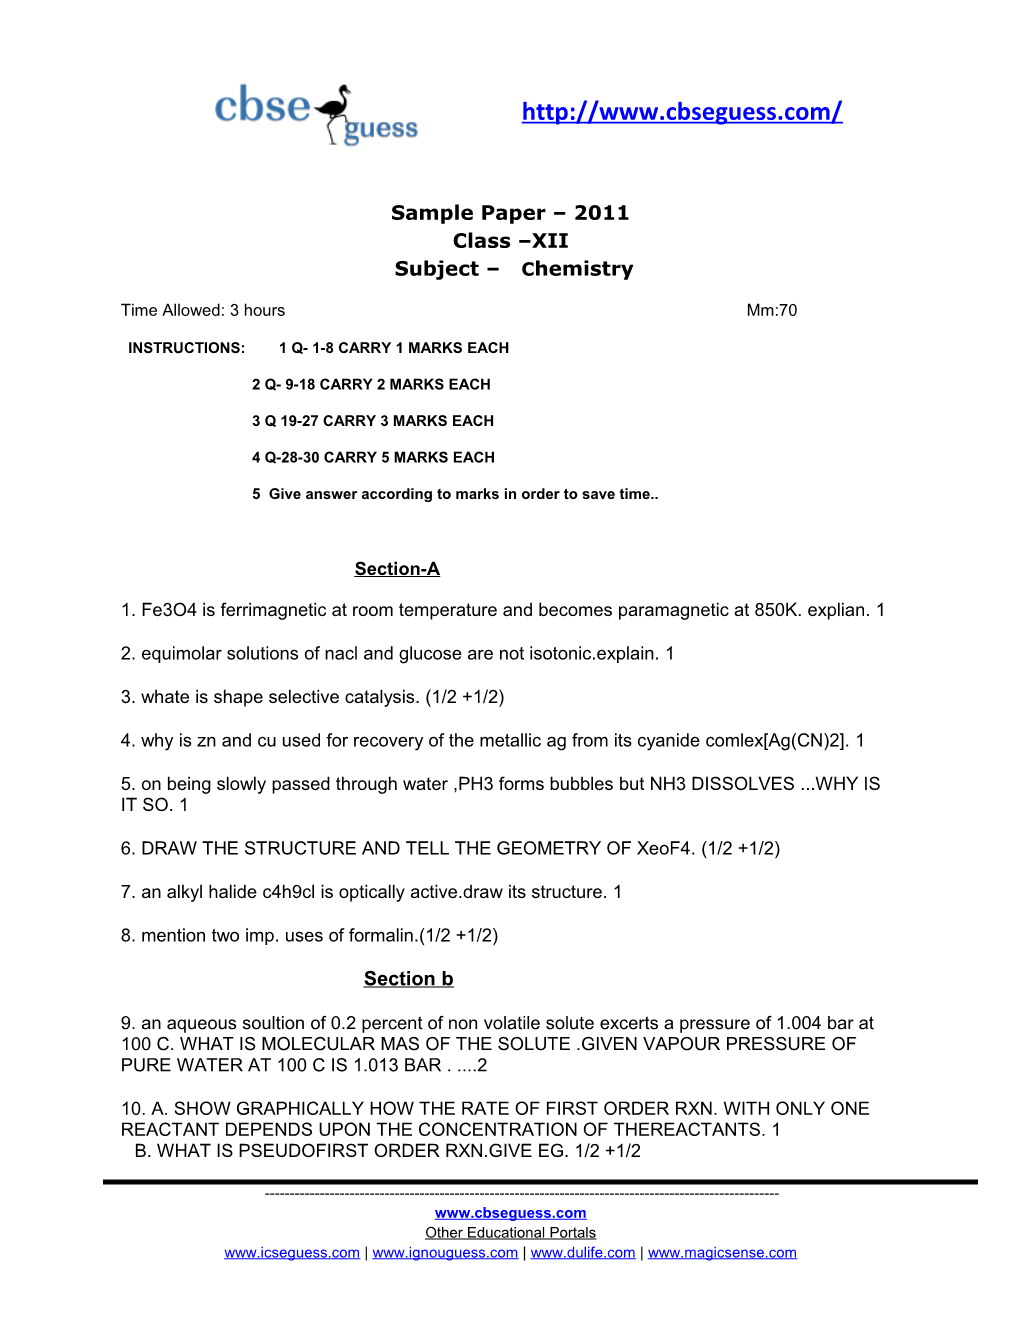 Sample Paper 2011 Class XII Subject Chemistry